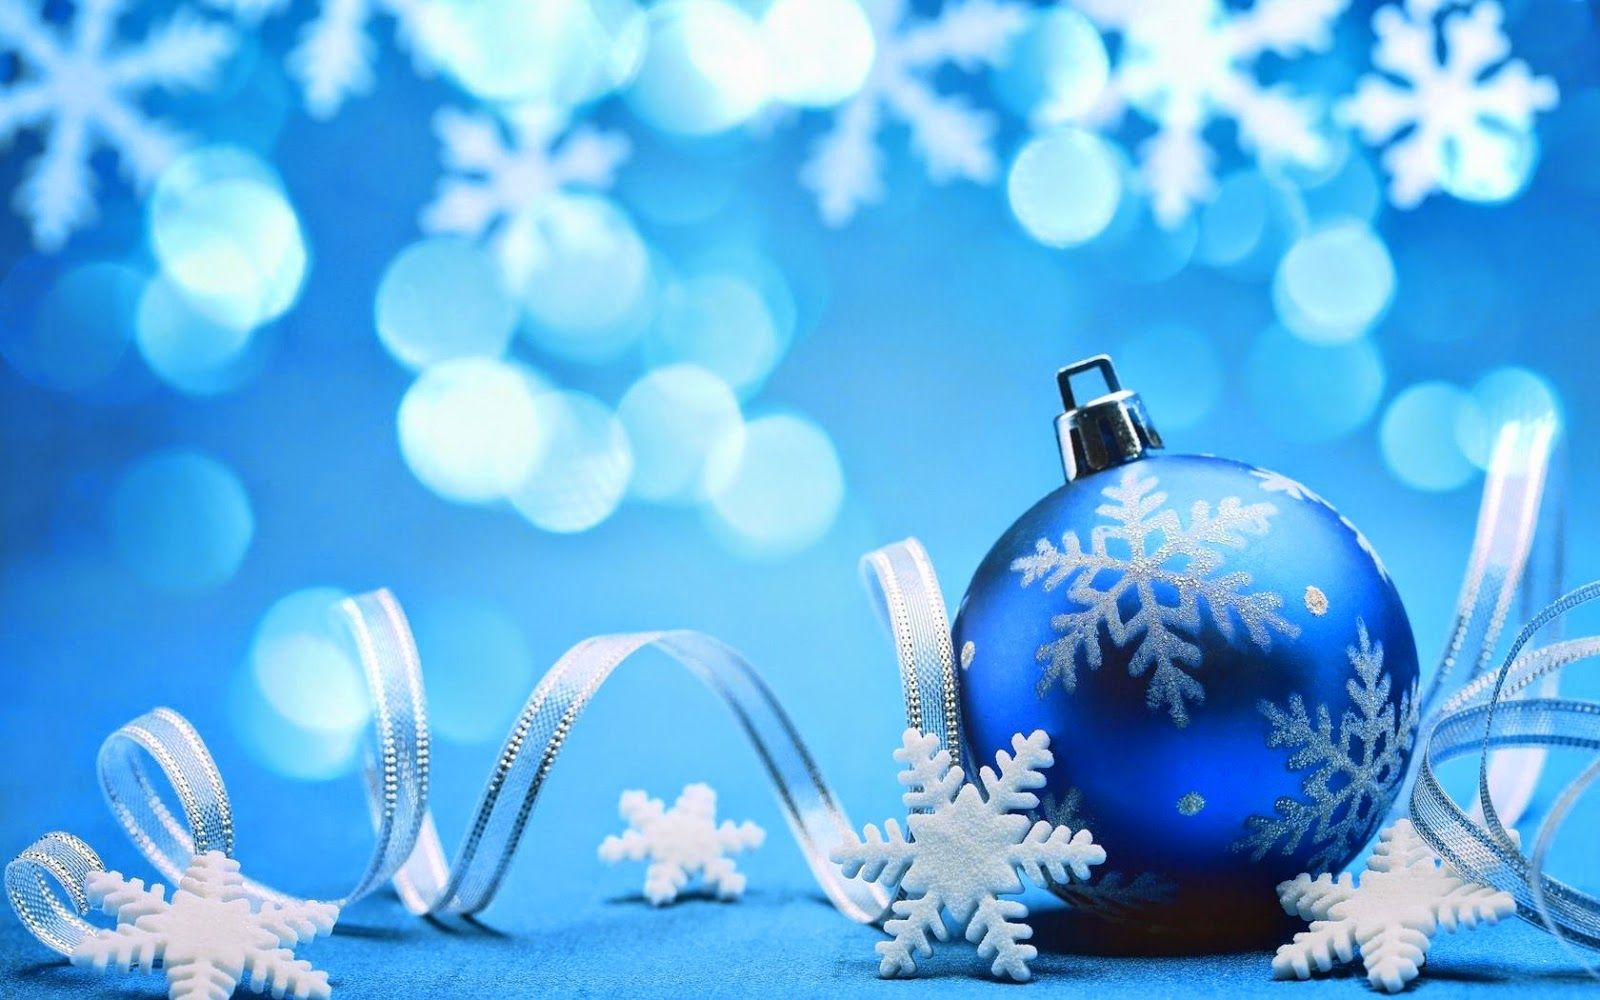 20 Best Christmas Wallpapers FULL HD